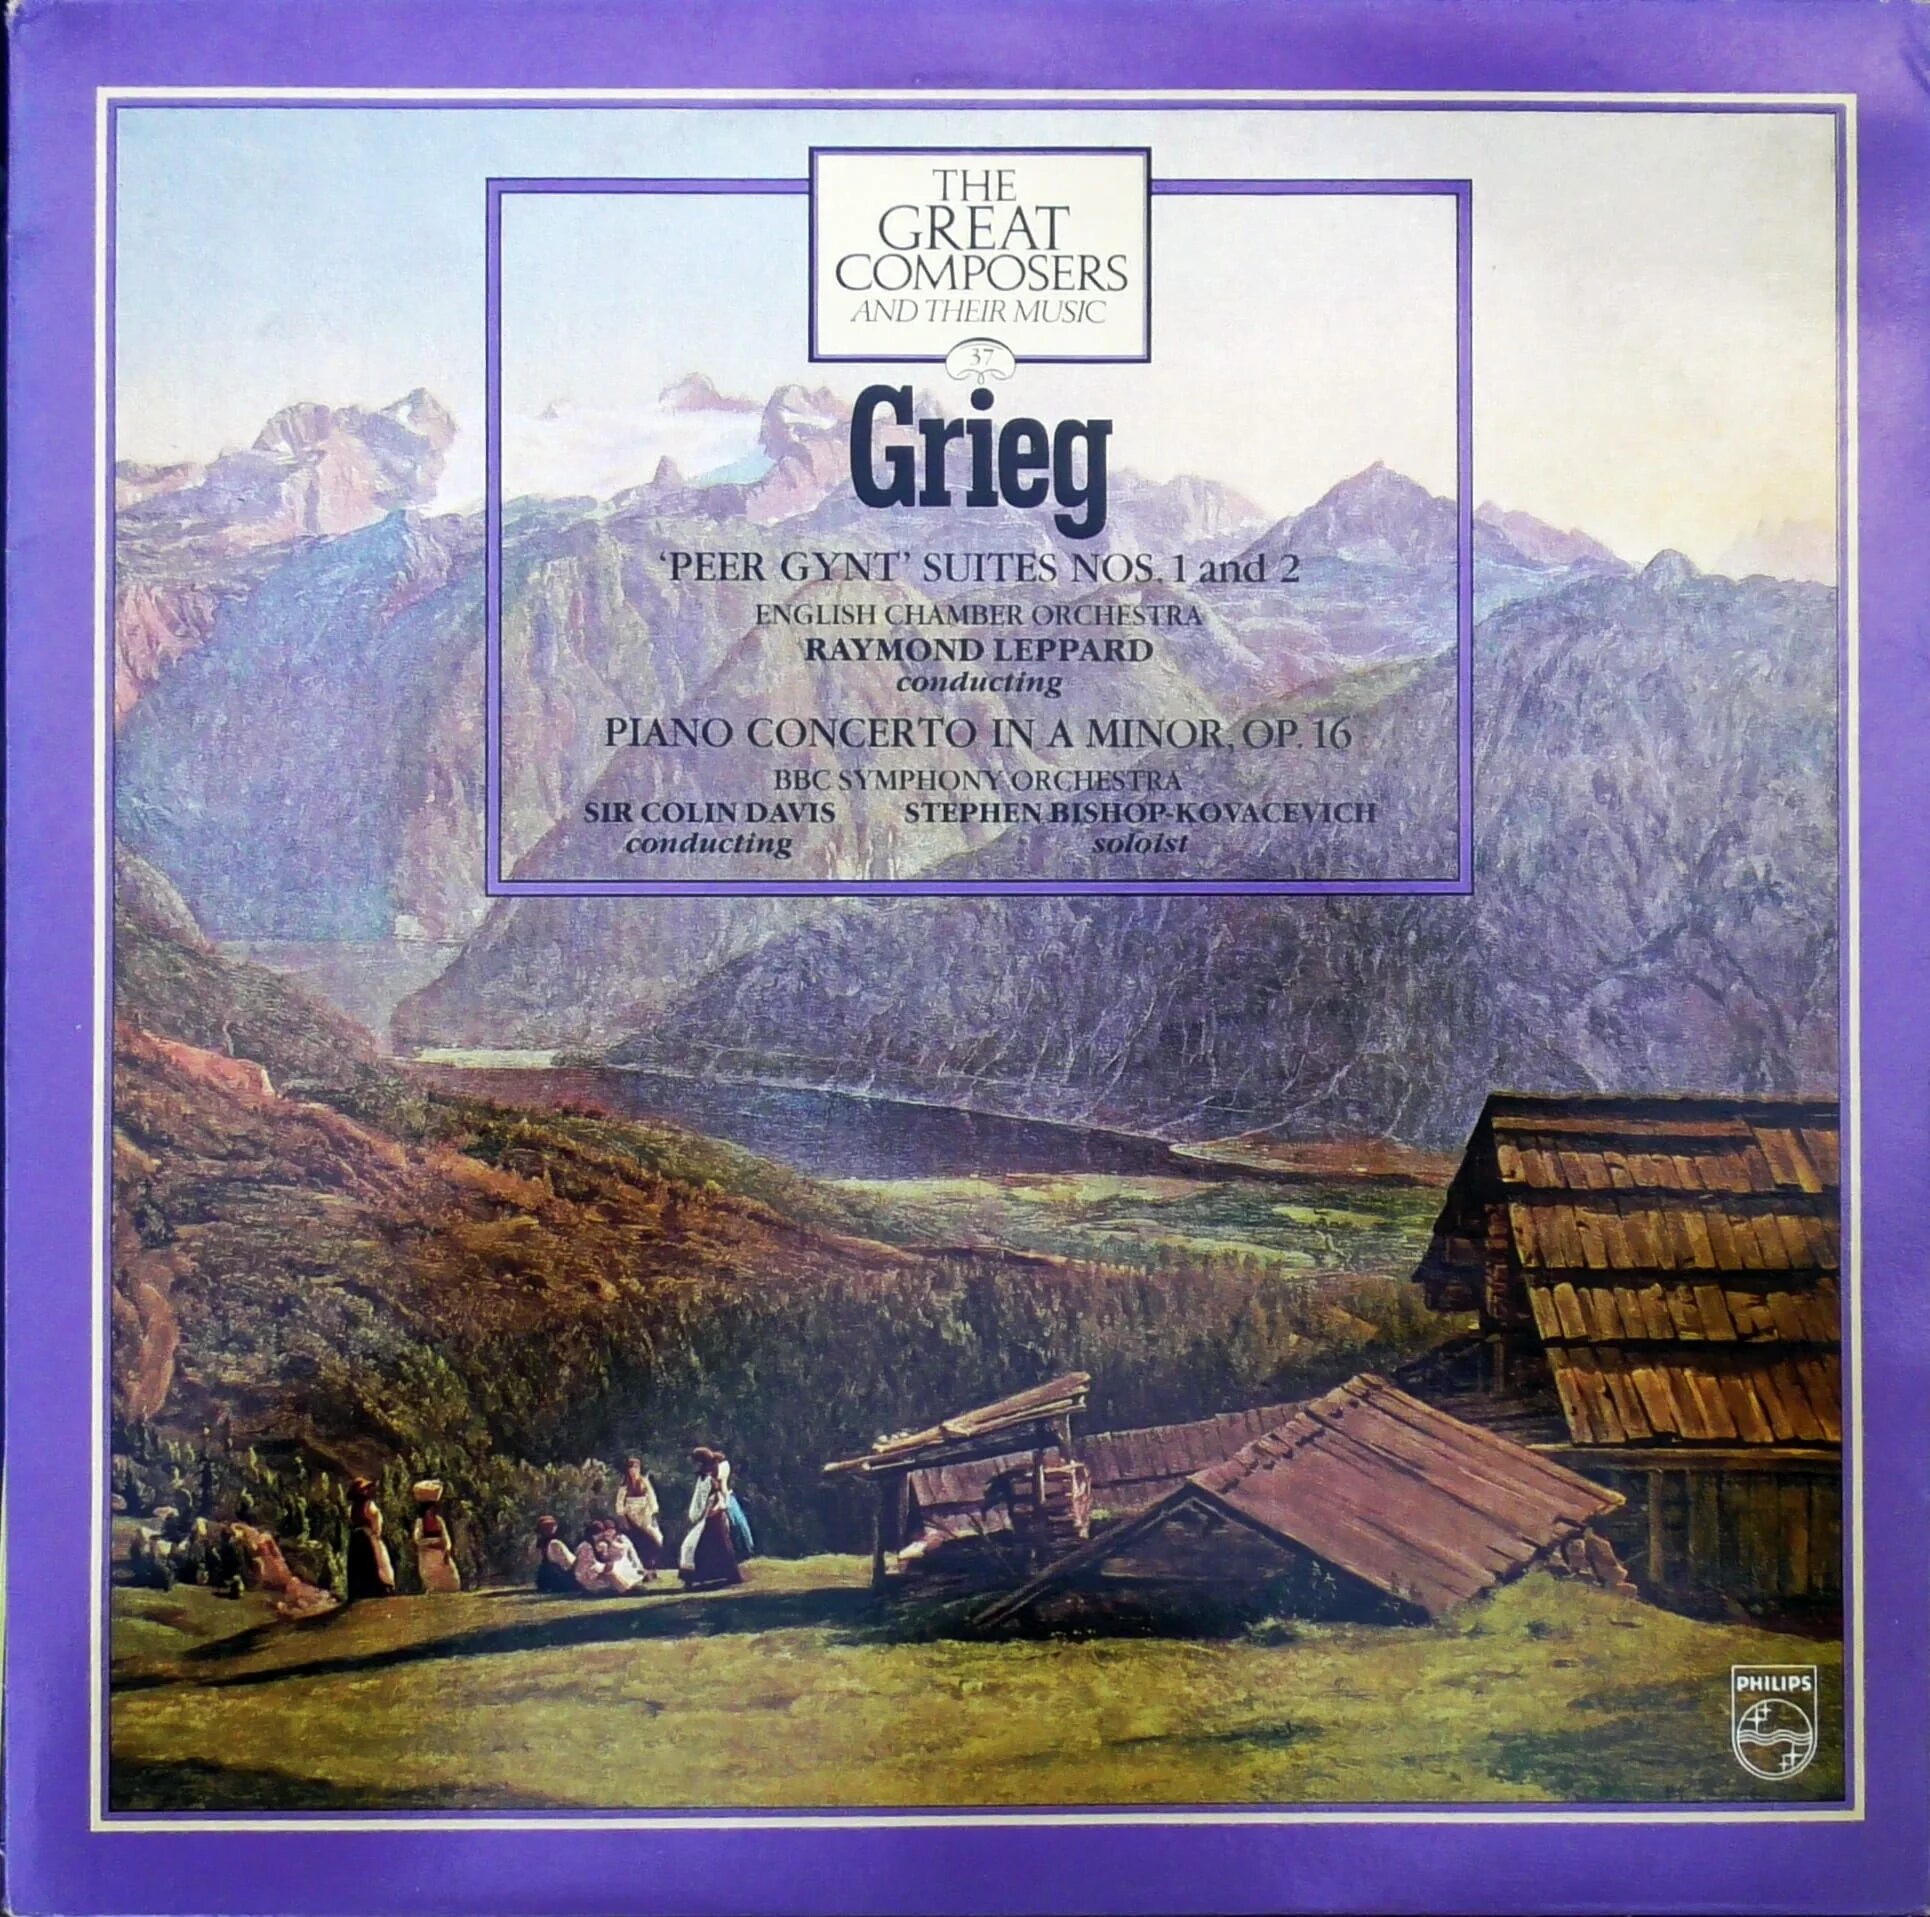 Grieg peer. Edvard Grieg - Piano Concerto in a Minor, op. 16. Edvard Grieg Suites обложки. Edvard Grieg - Piano Concerto. 2009. Edvard.Grieg-Romantic.Classic.2001.